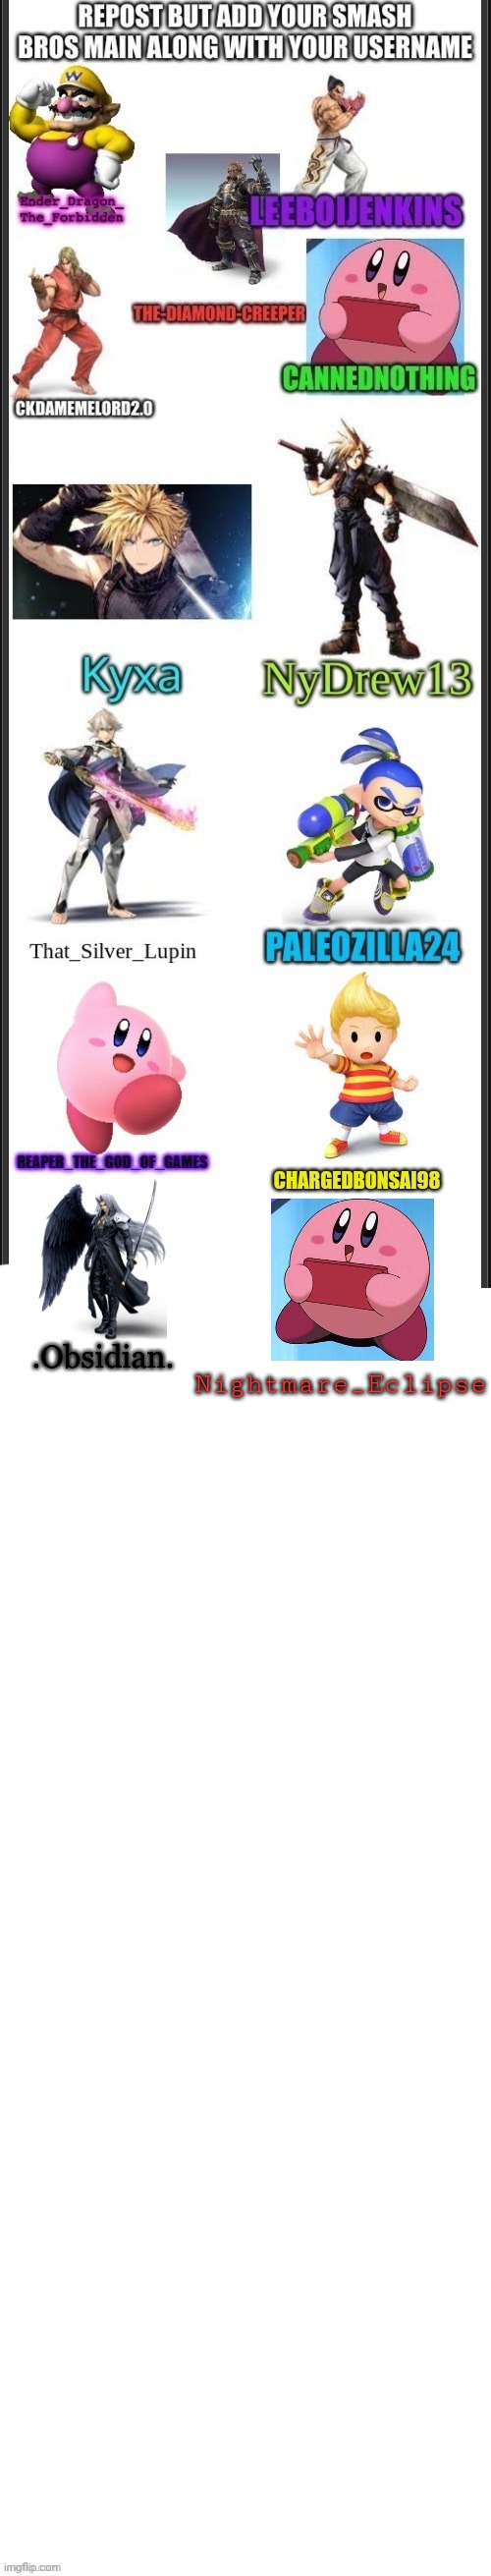 The Pink Demon | Nightmare_Eclipse | image tagged in smash bros,repost | made w/ Imgflip meme maker